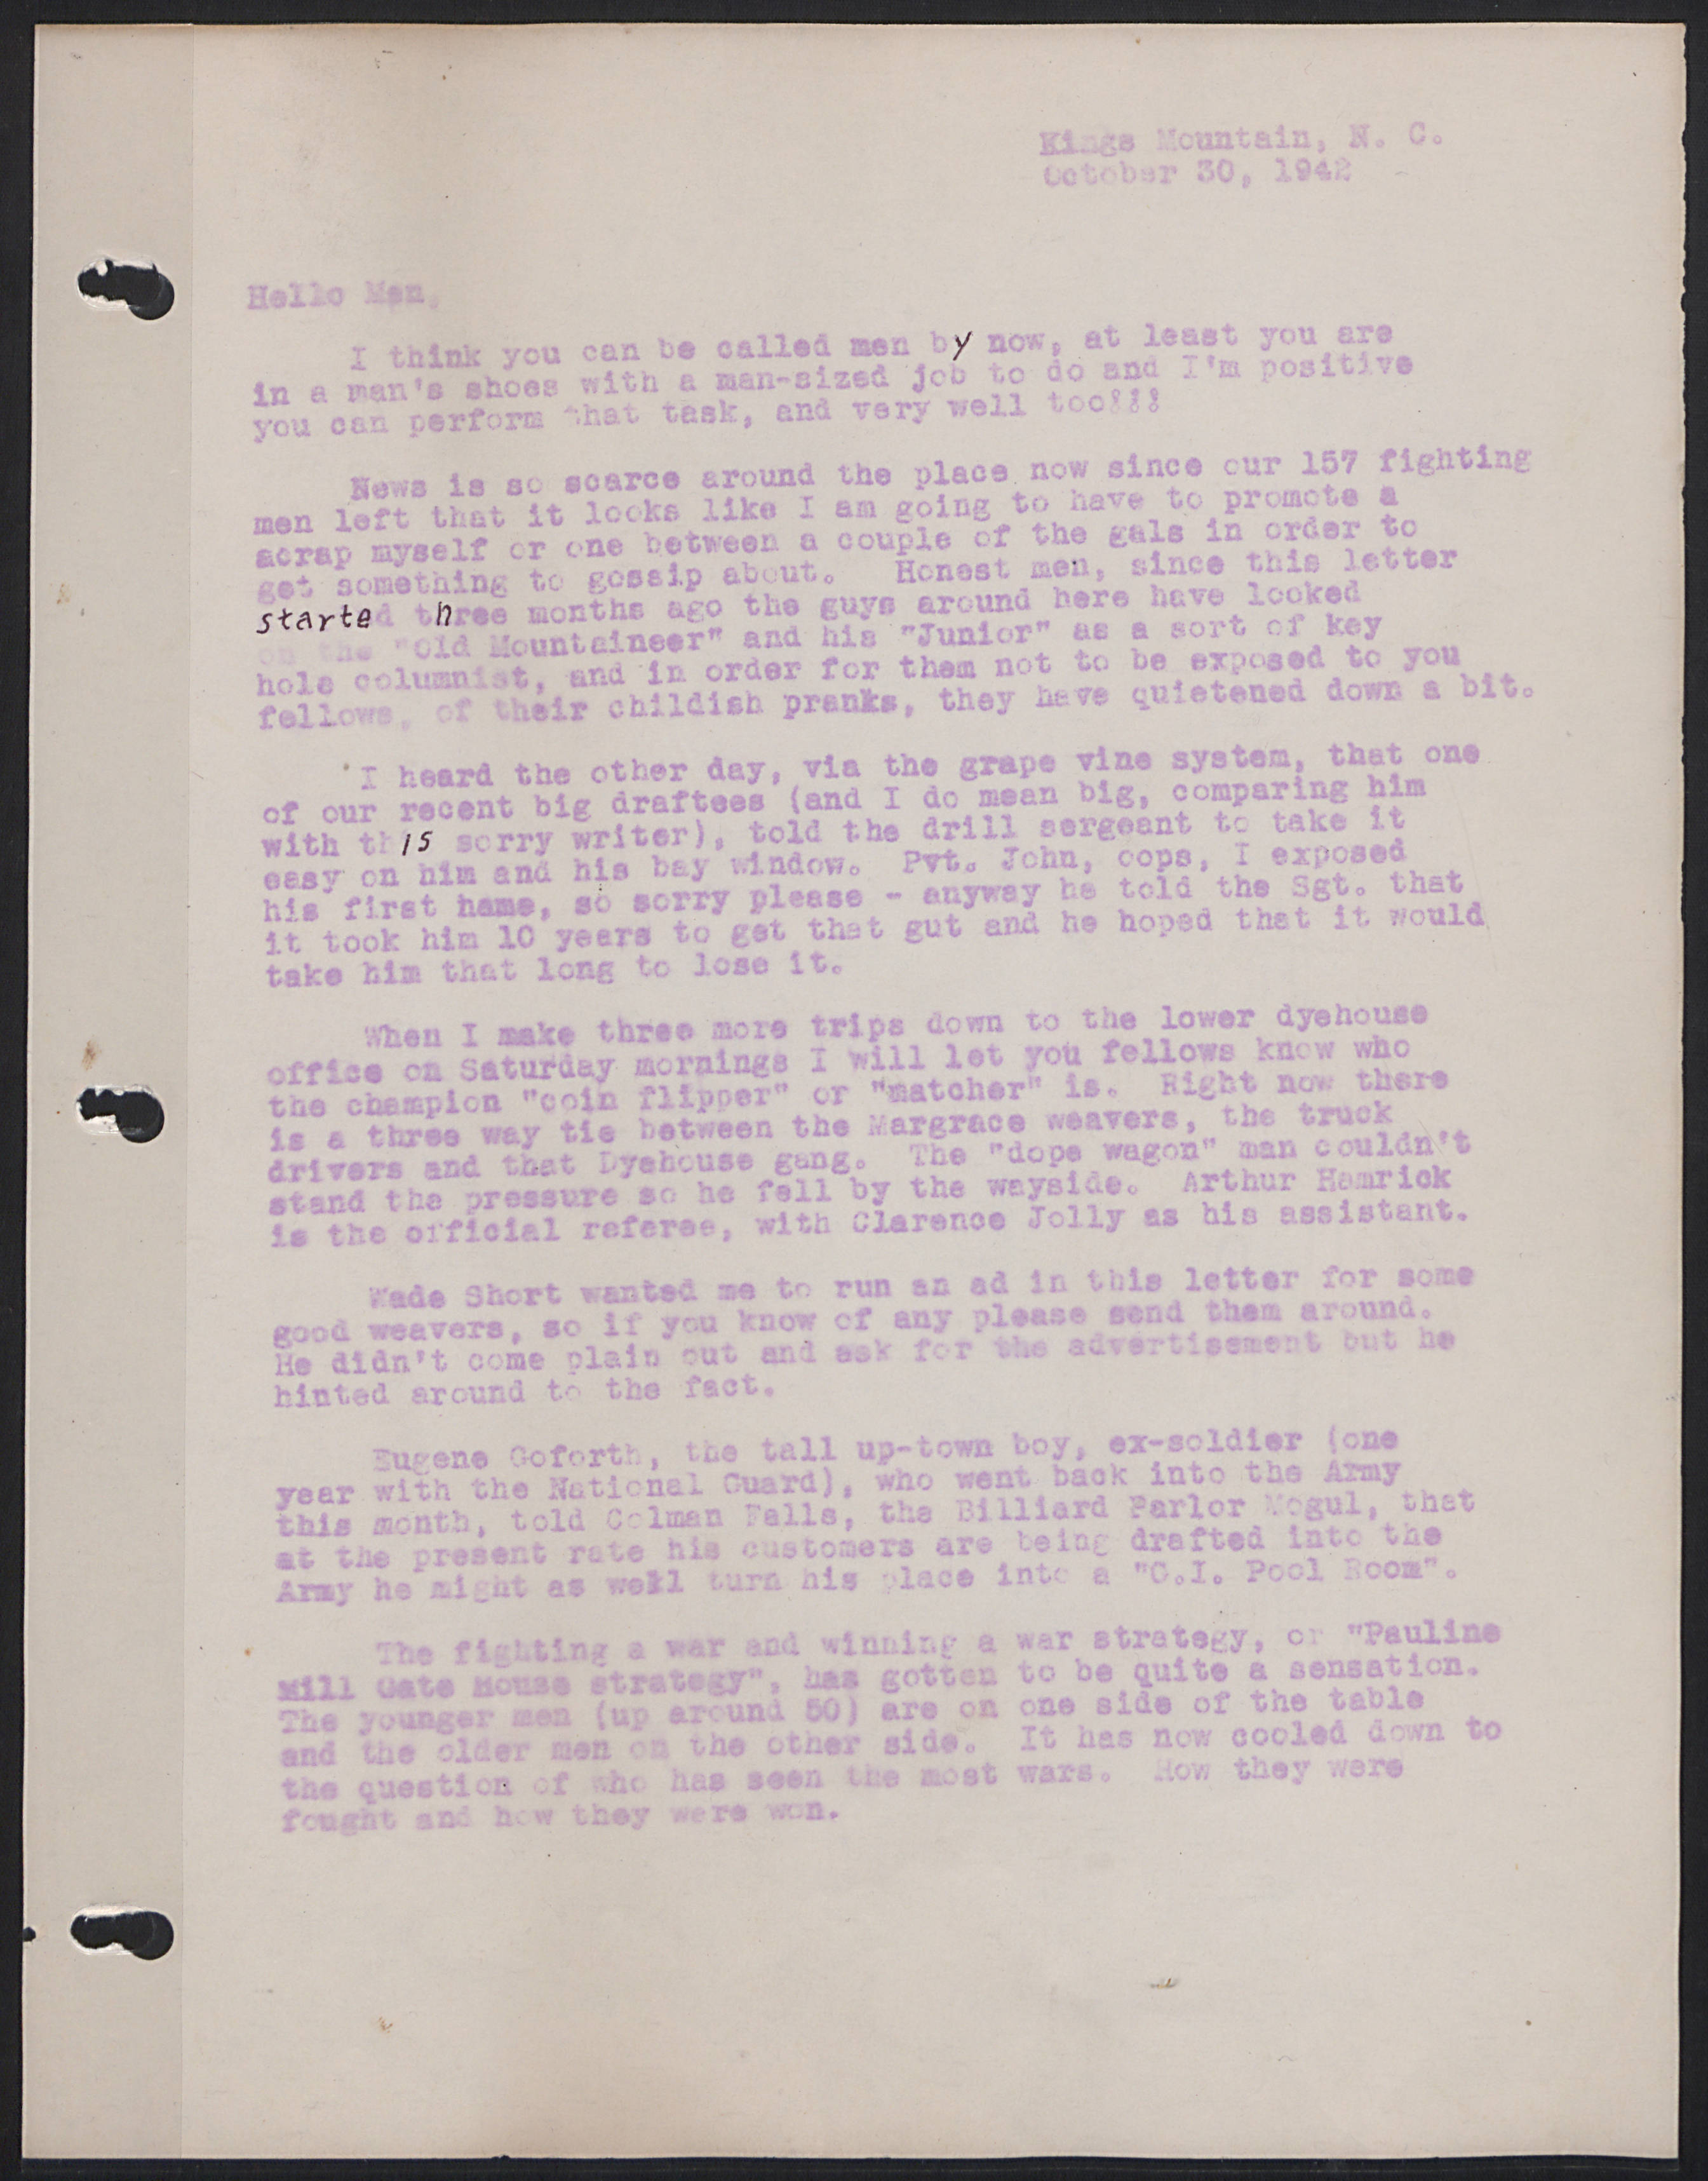 The Old Mountaineer Letters to Servicemen page 14